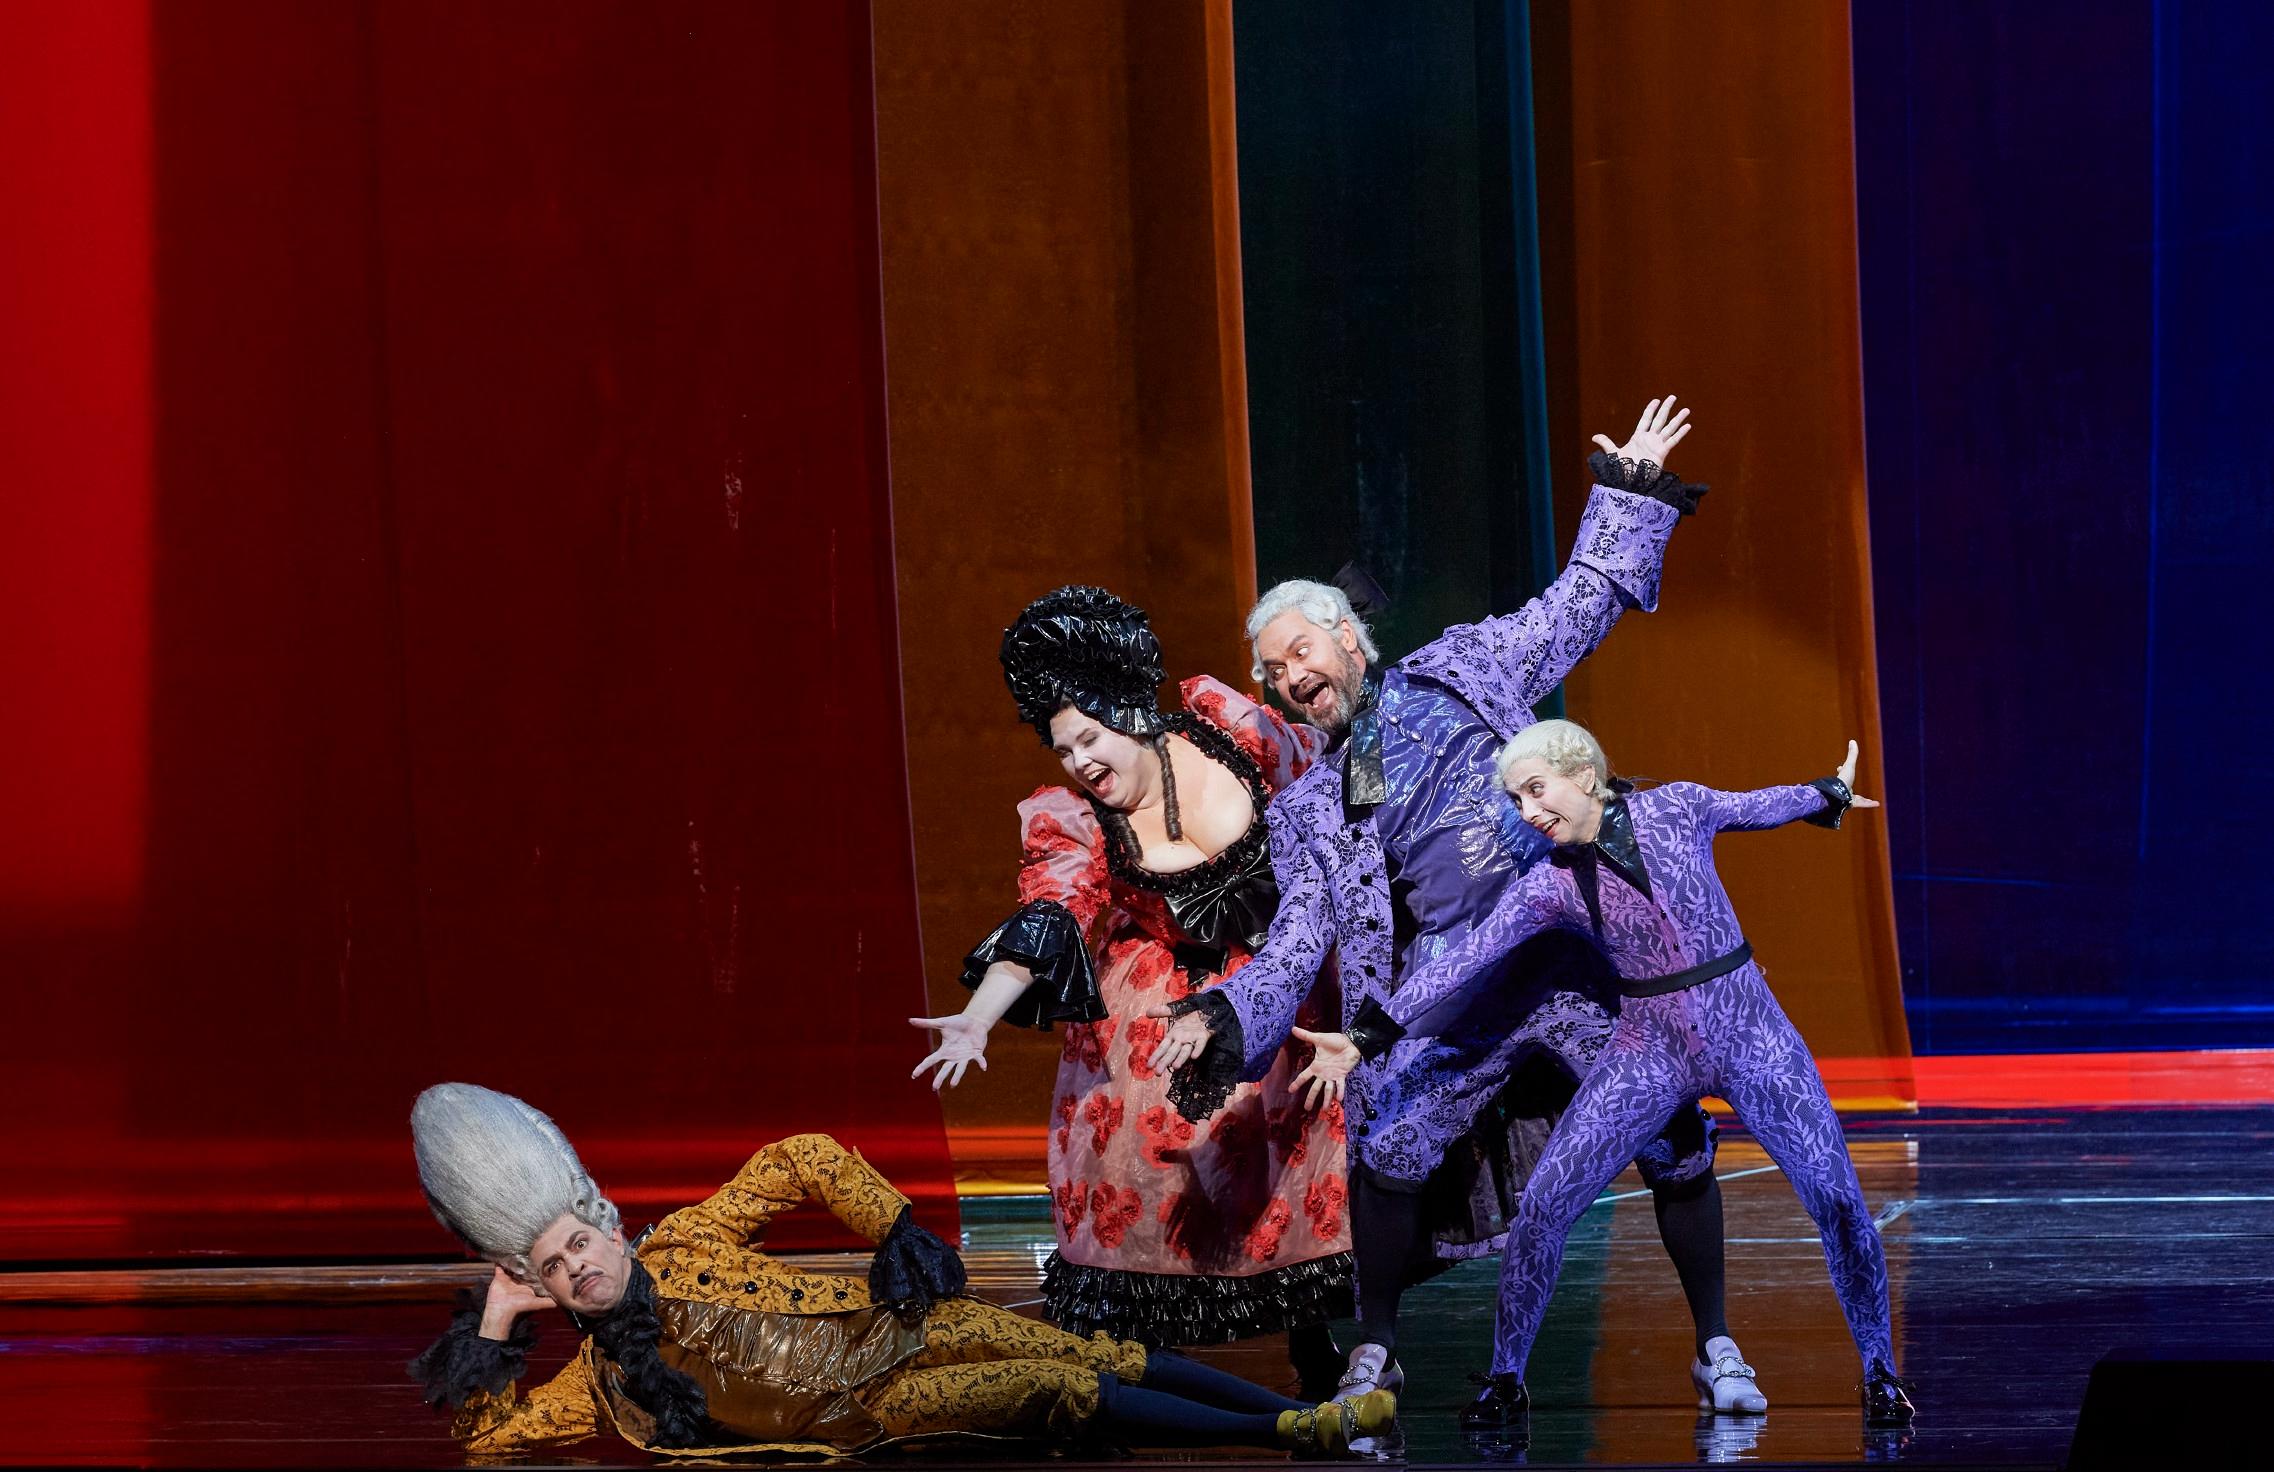 Exhibition of the opera by G. Rossini "The Barber of Seville" at the Vienna Opera